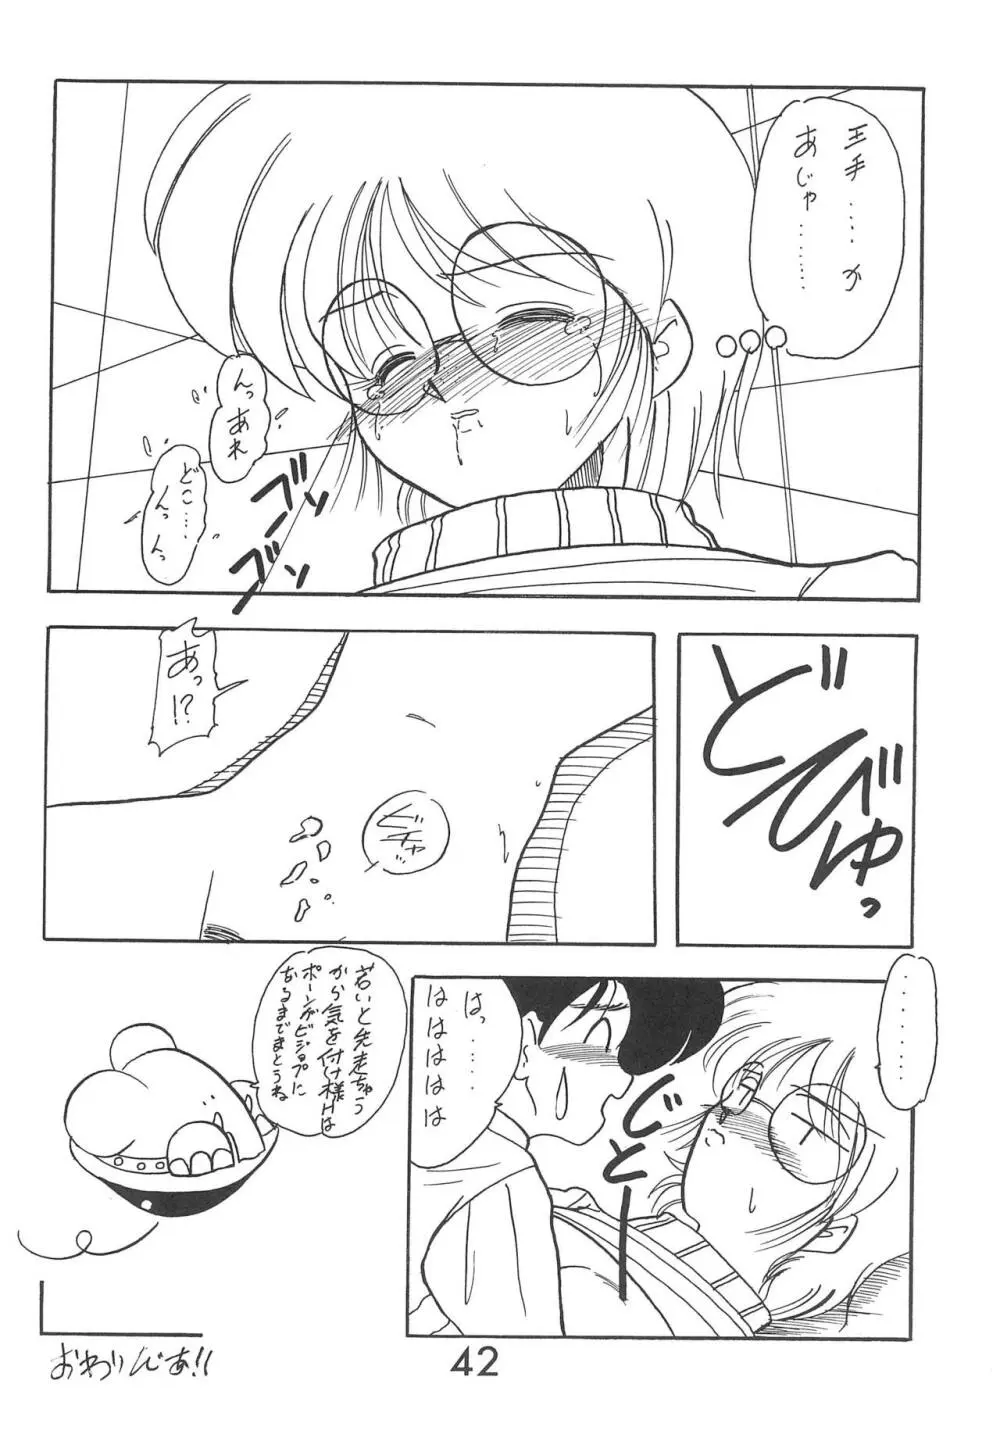 Fun House 9th Chame! - page42